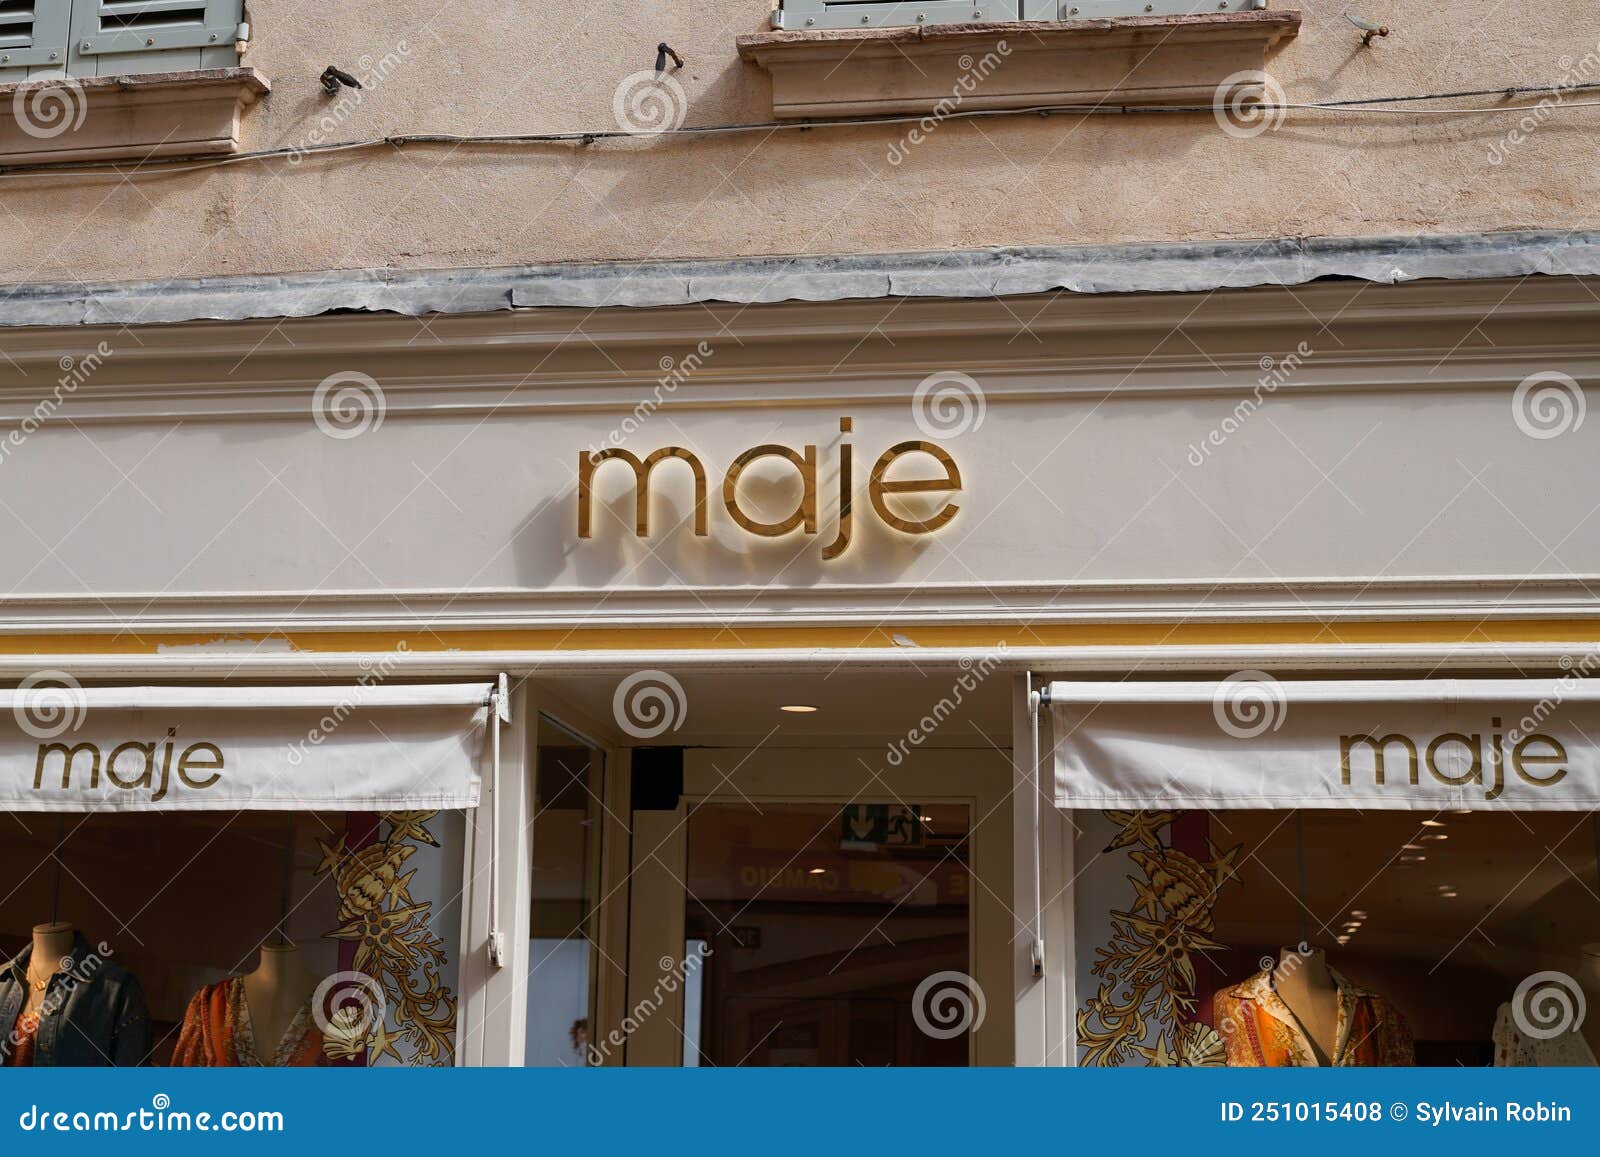 Maje Boutique Brand Logo and Sign Text on Facade Entrance Fashion Front ...